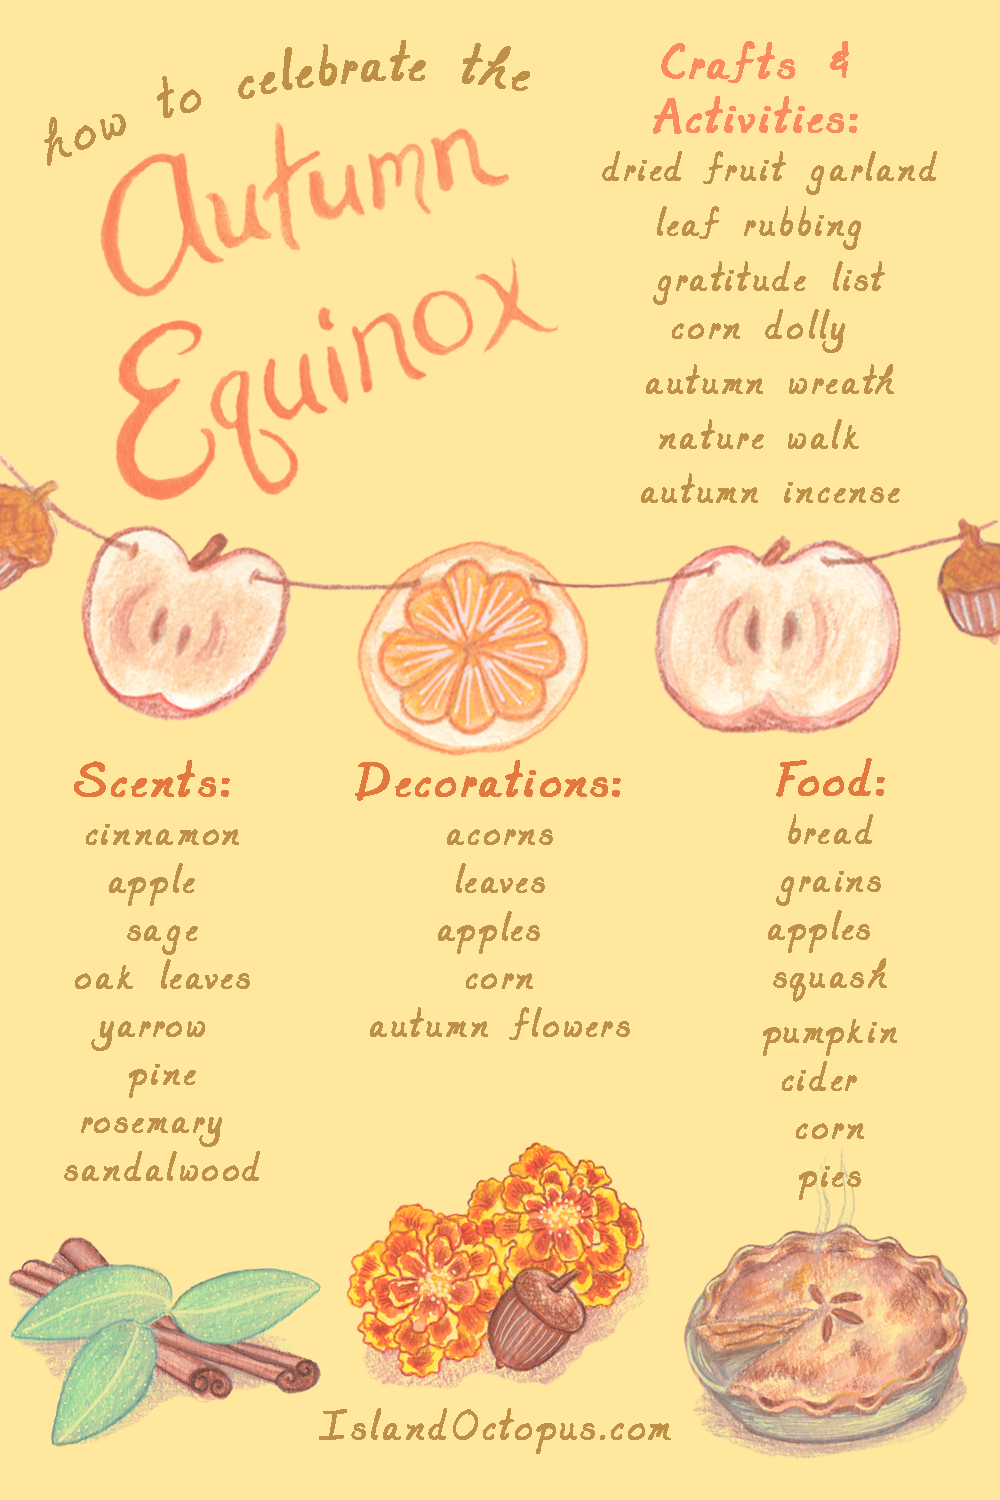 How to celebrate the Autumn Equinox by IslandOctopus.com